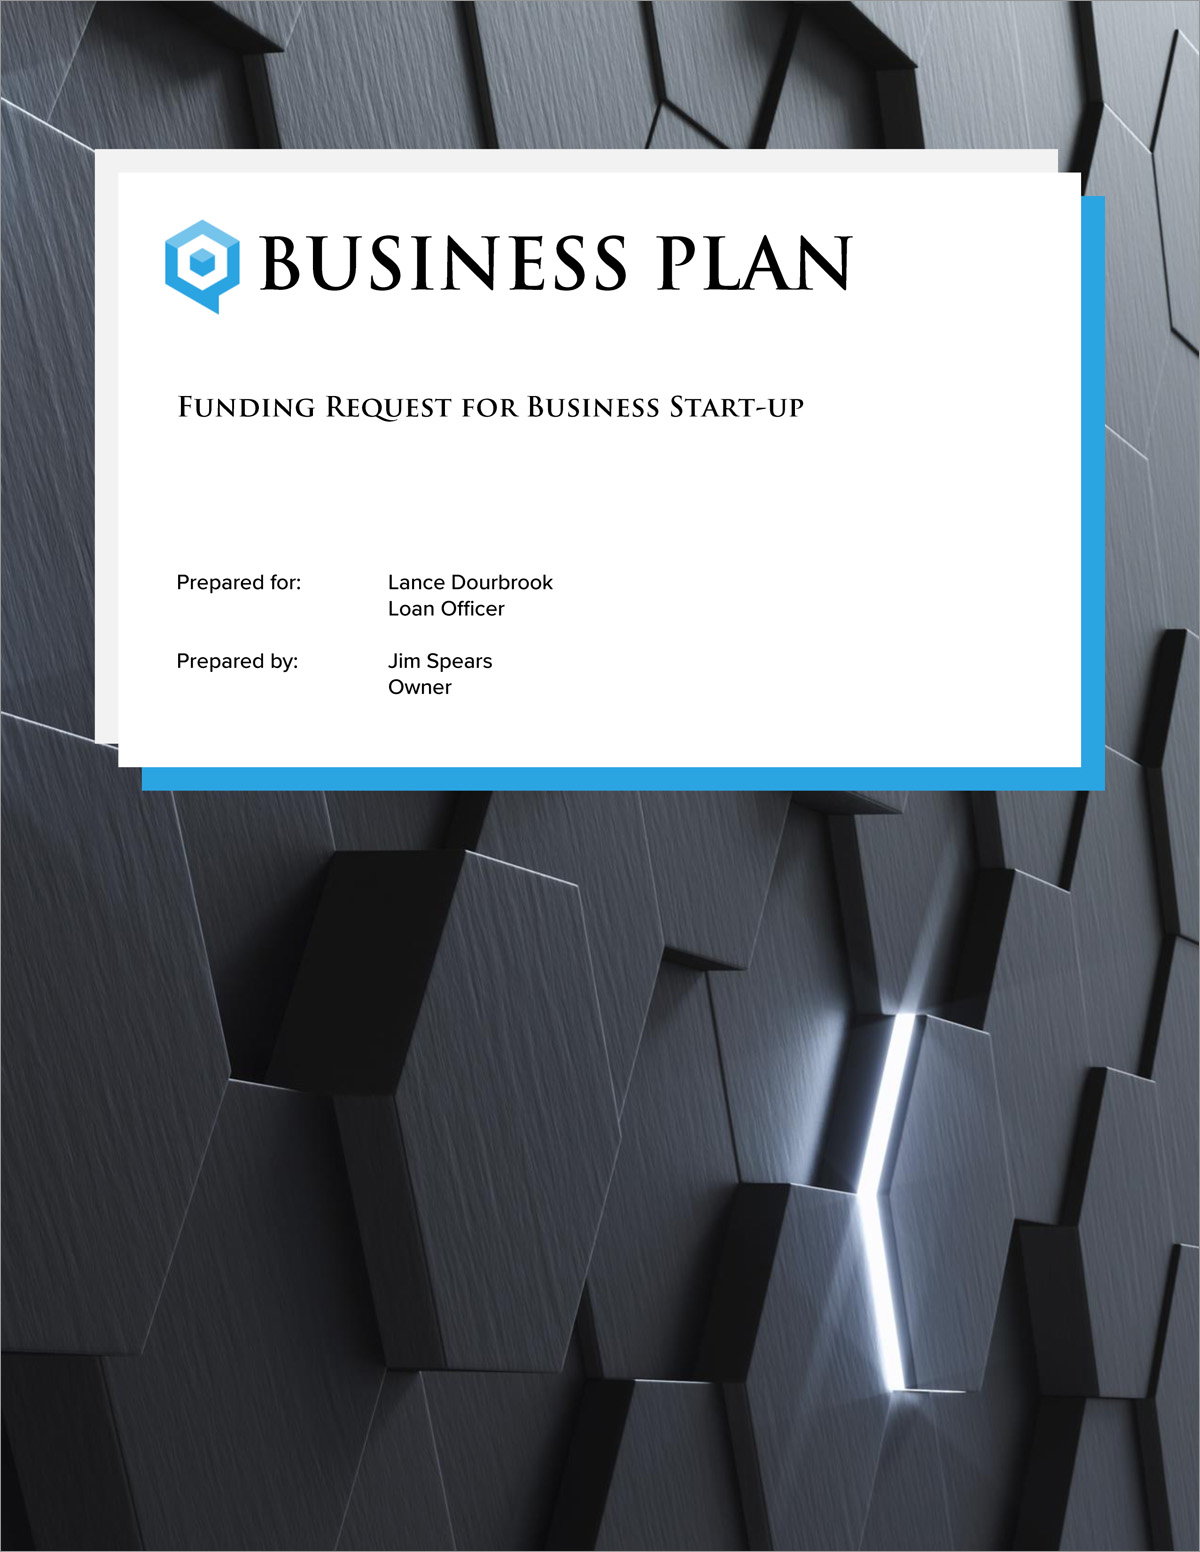 business plan related to computer